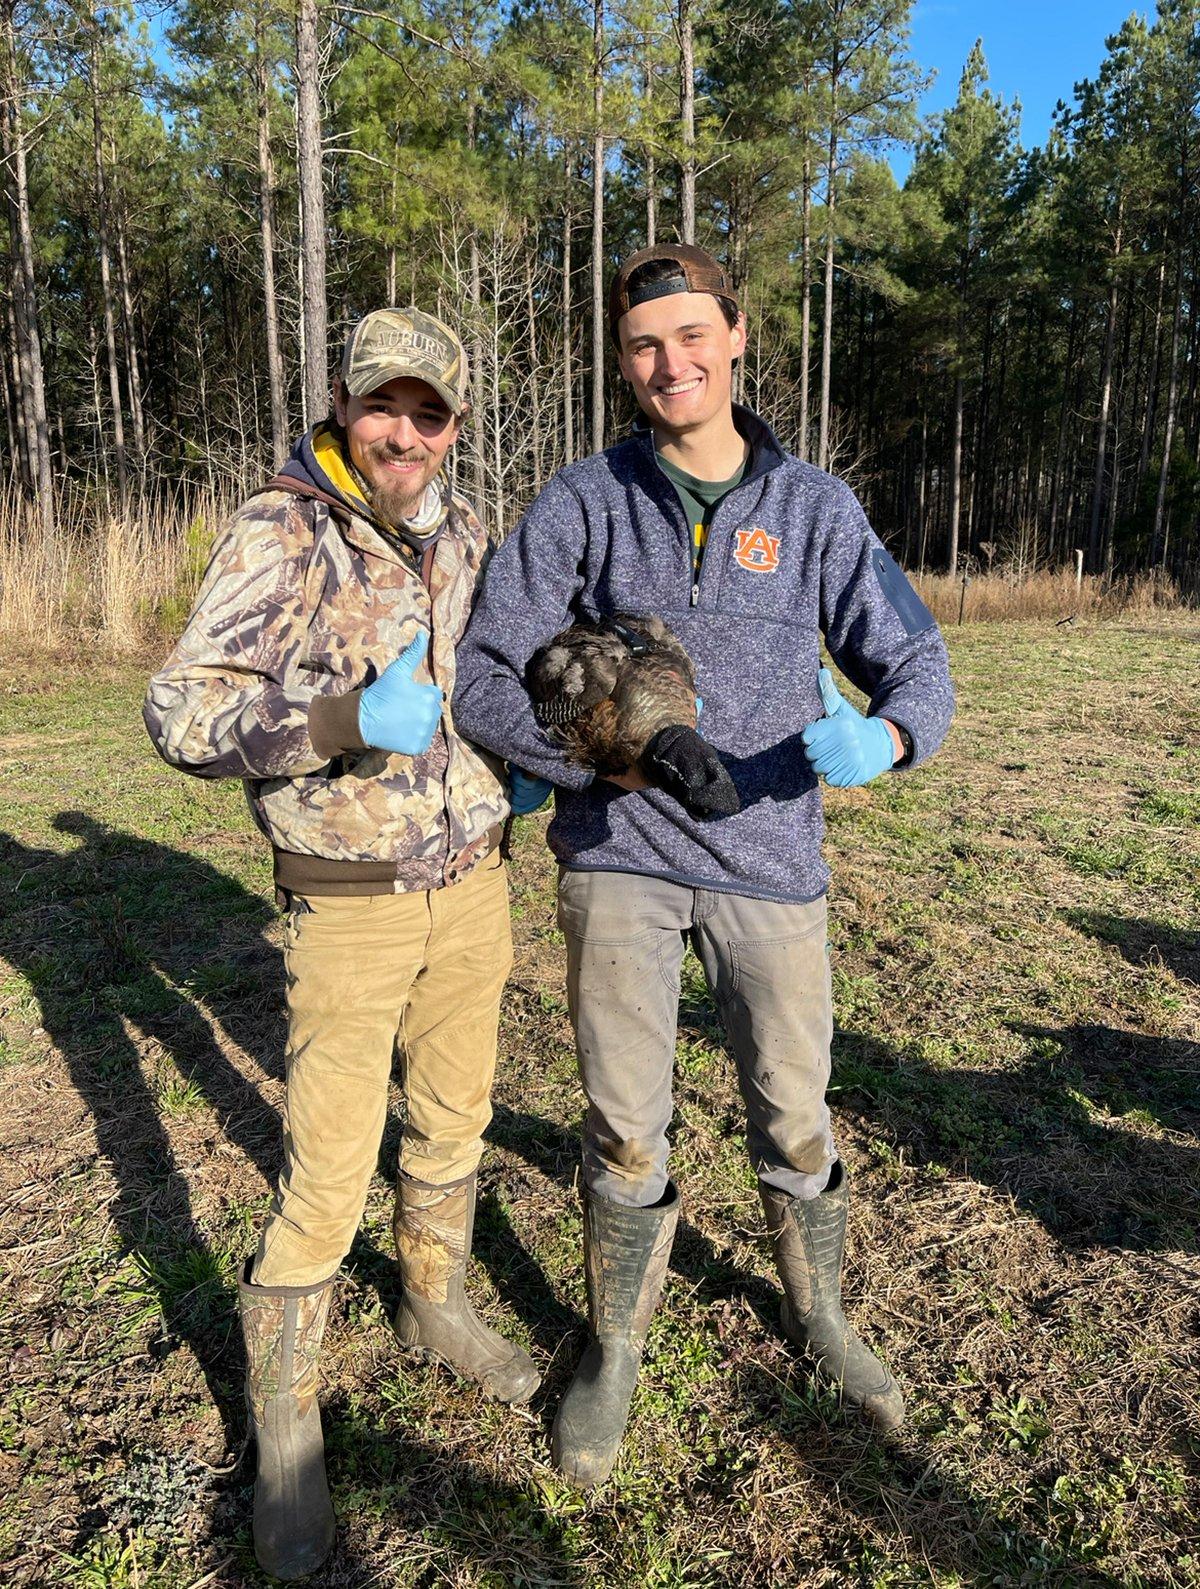 Graduate students Matthew Day and Kevin Ostrander fitting a captured hen with a transmitter. Photo by Dr. Will Gulsby